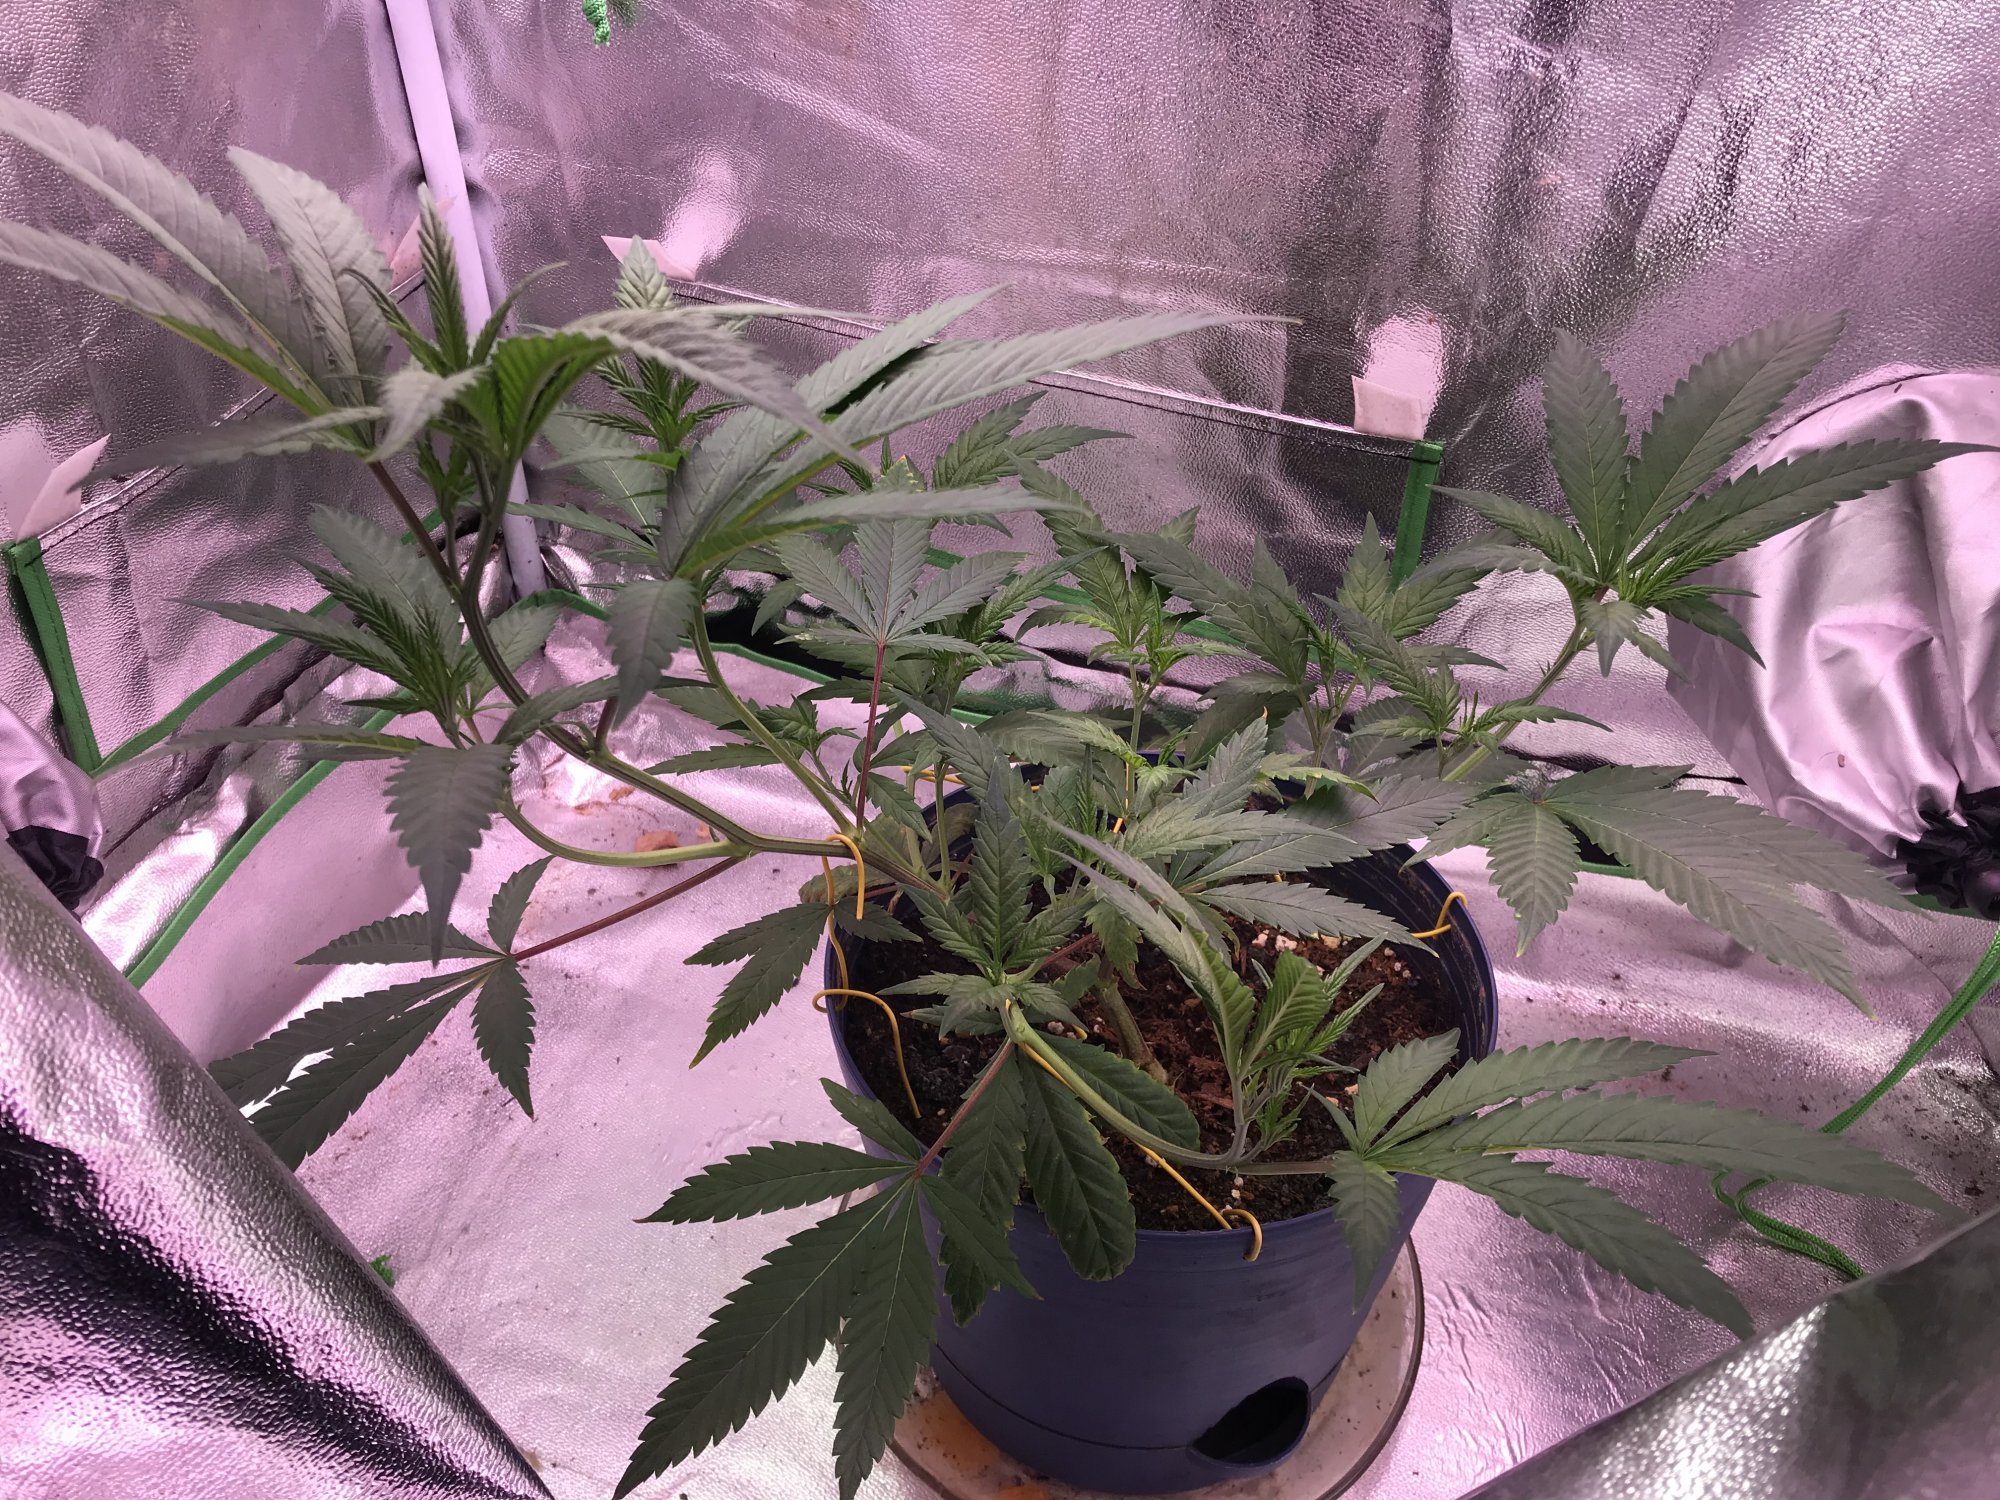 Hello new to the thread also new to lst and need advice